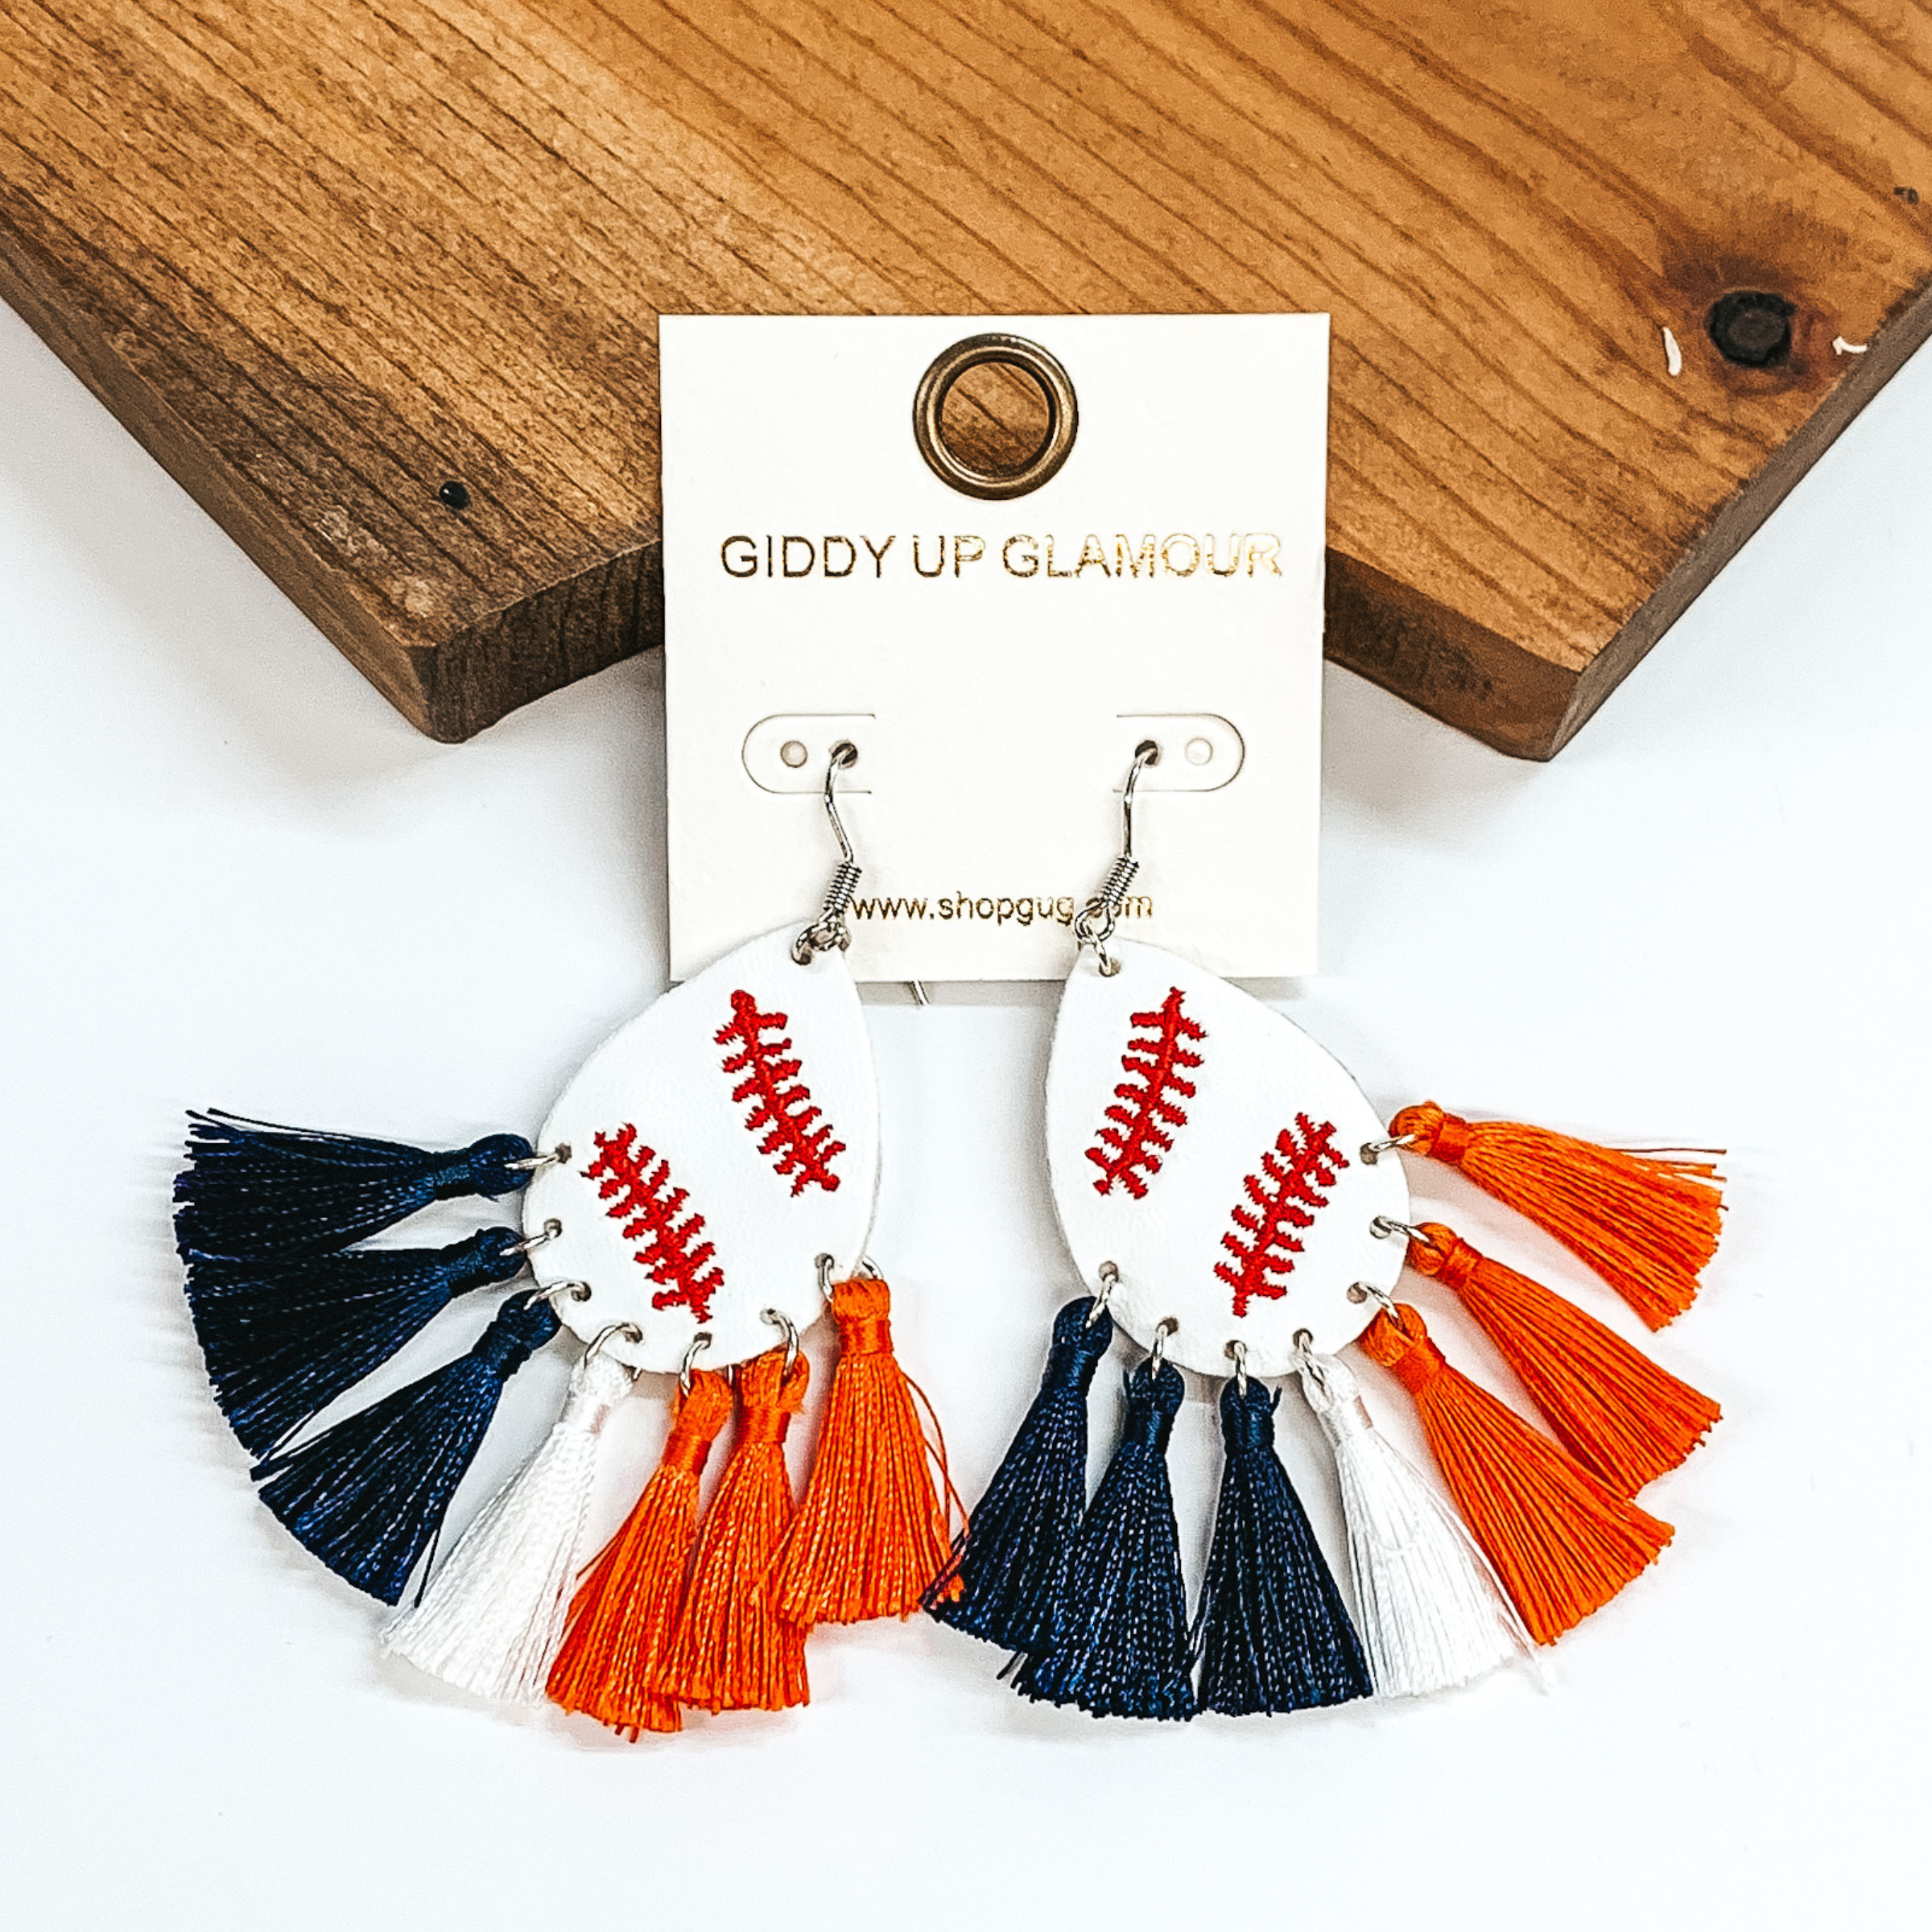 Pictured are a pair of silver fish hook earrings with a white teardrop with red stitching to look like a baseball. These earrings also include navy, white, and orange tassels at the bottom. These earrings are pictured in front of a brown block on a white background. 